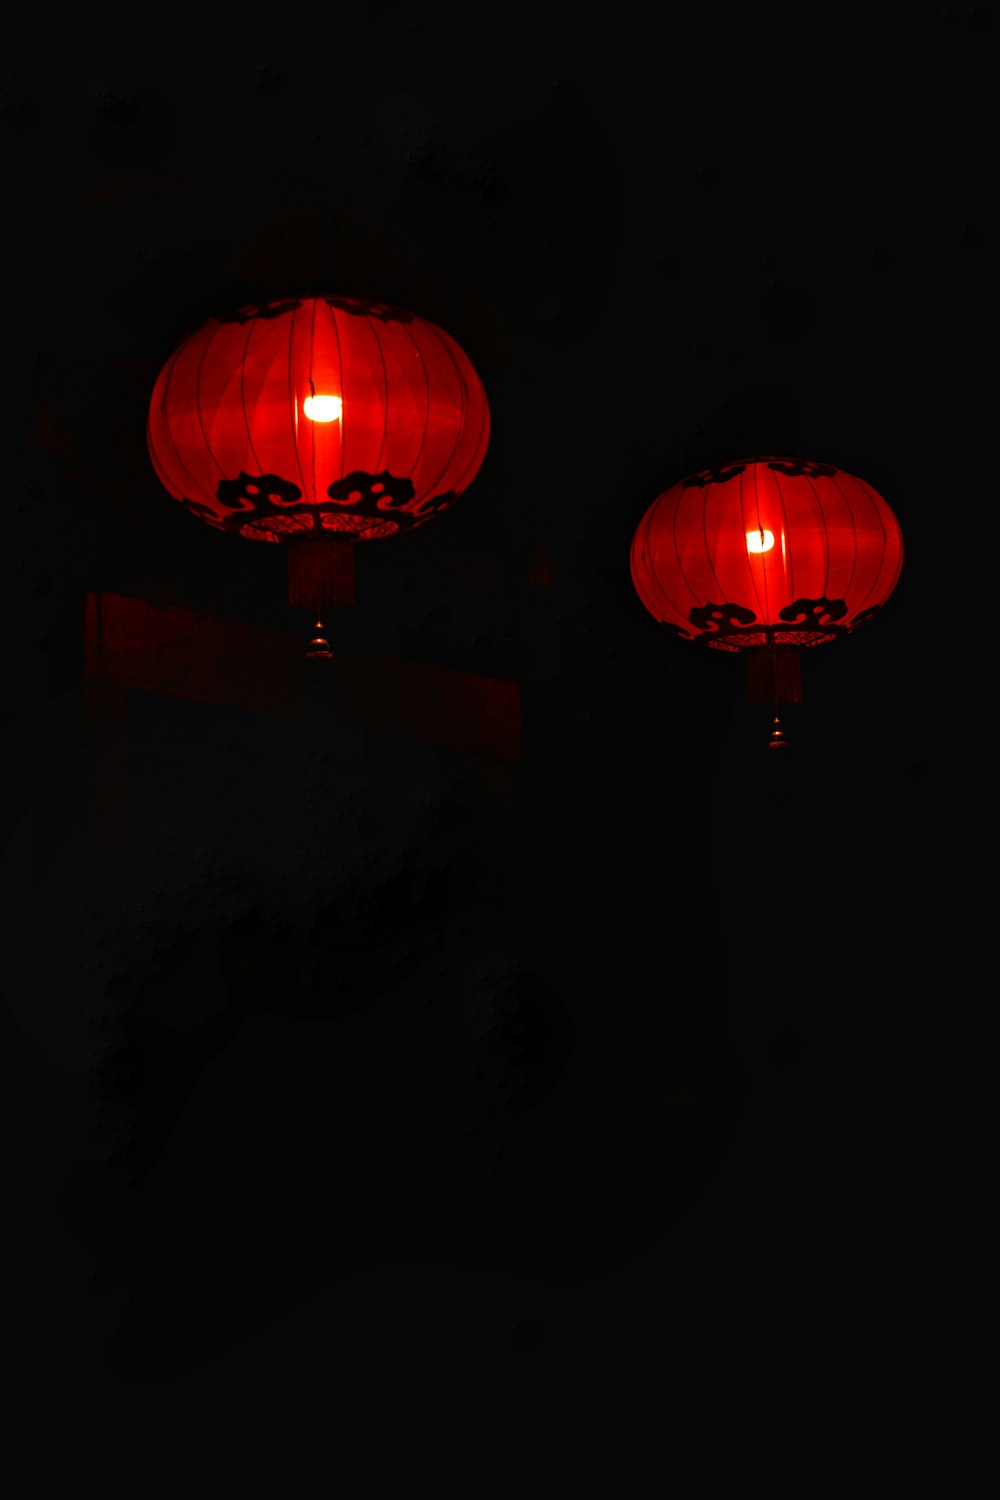 red paper lantern turned on during nighttime